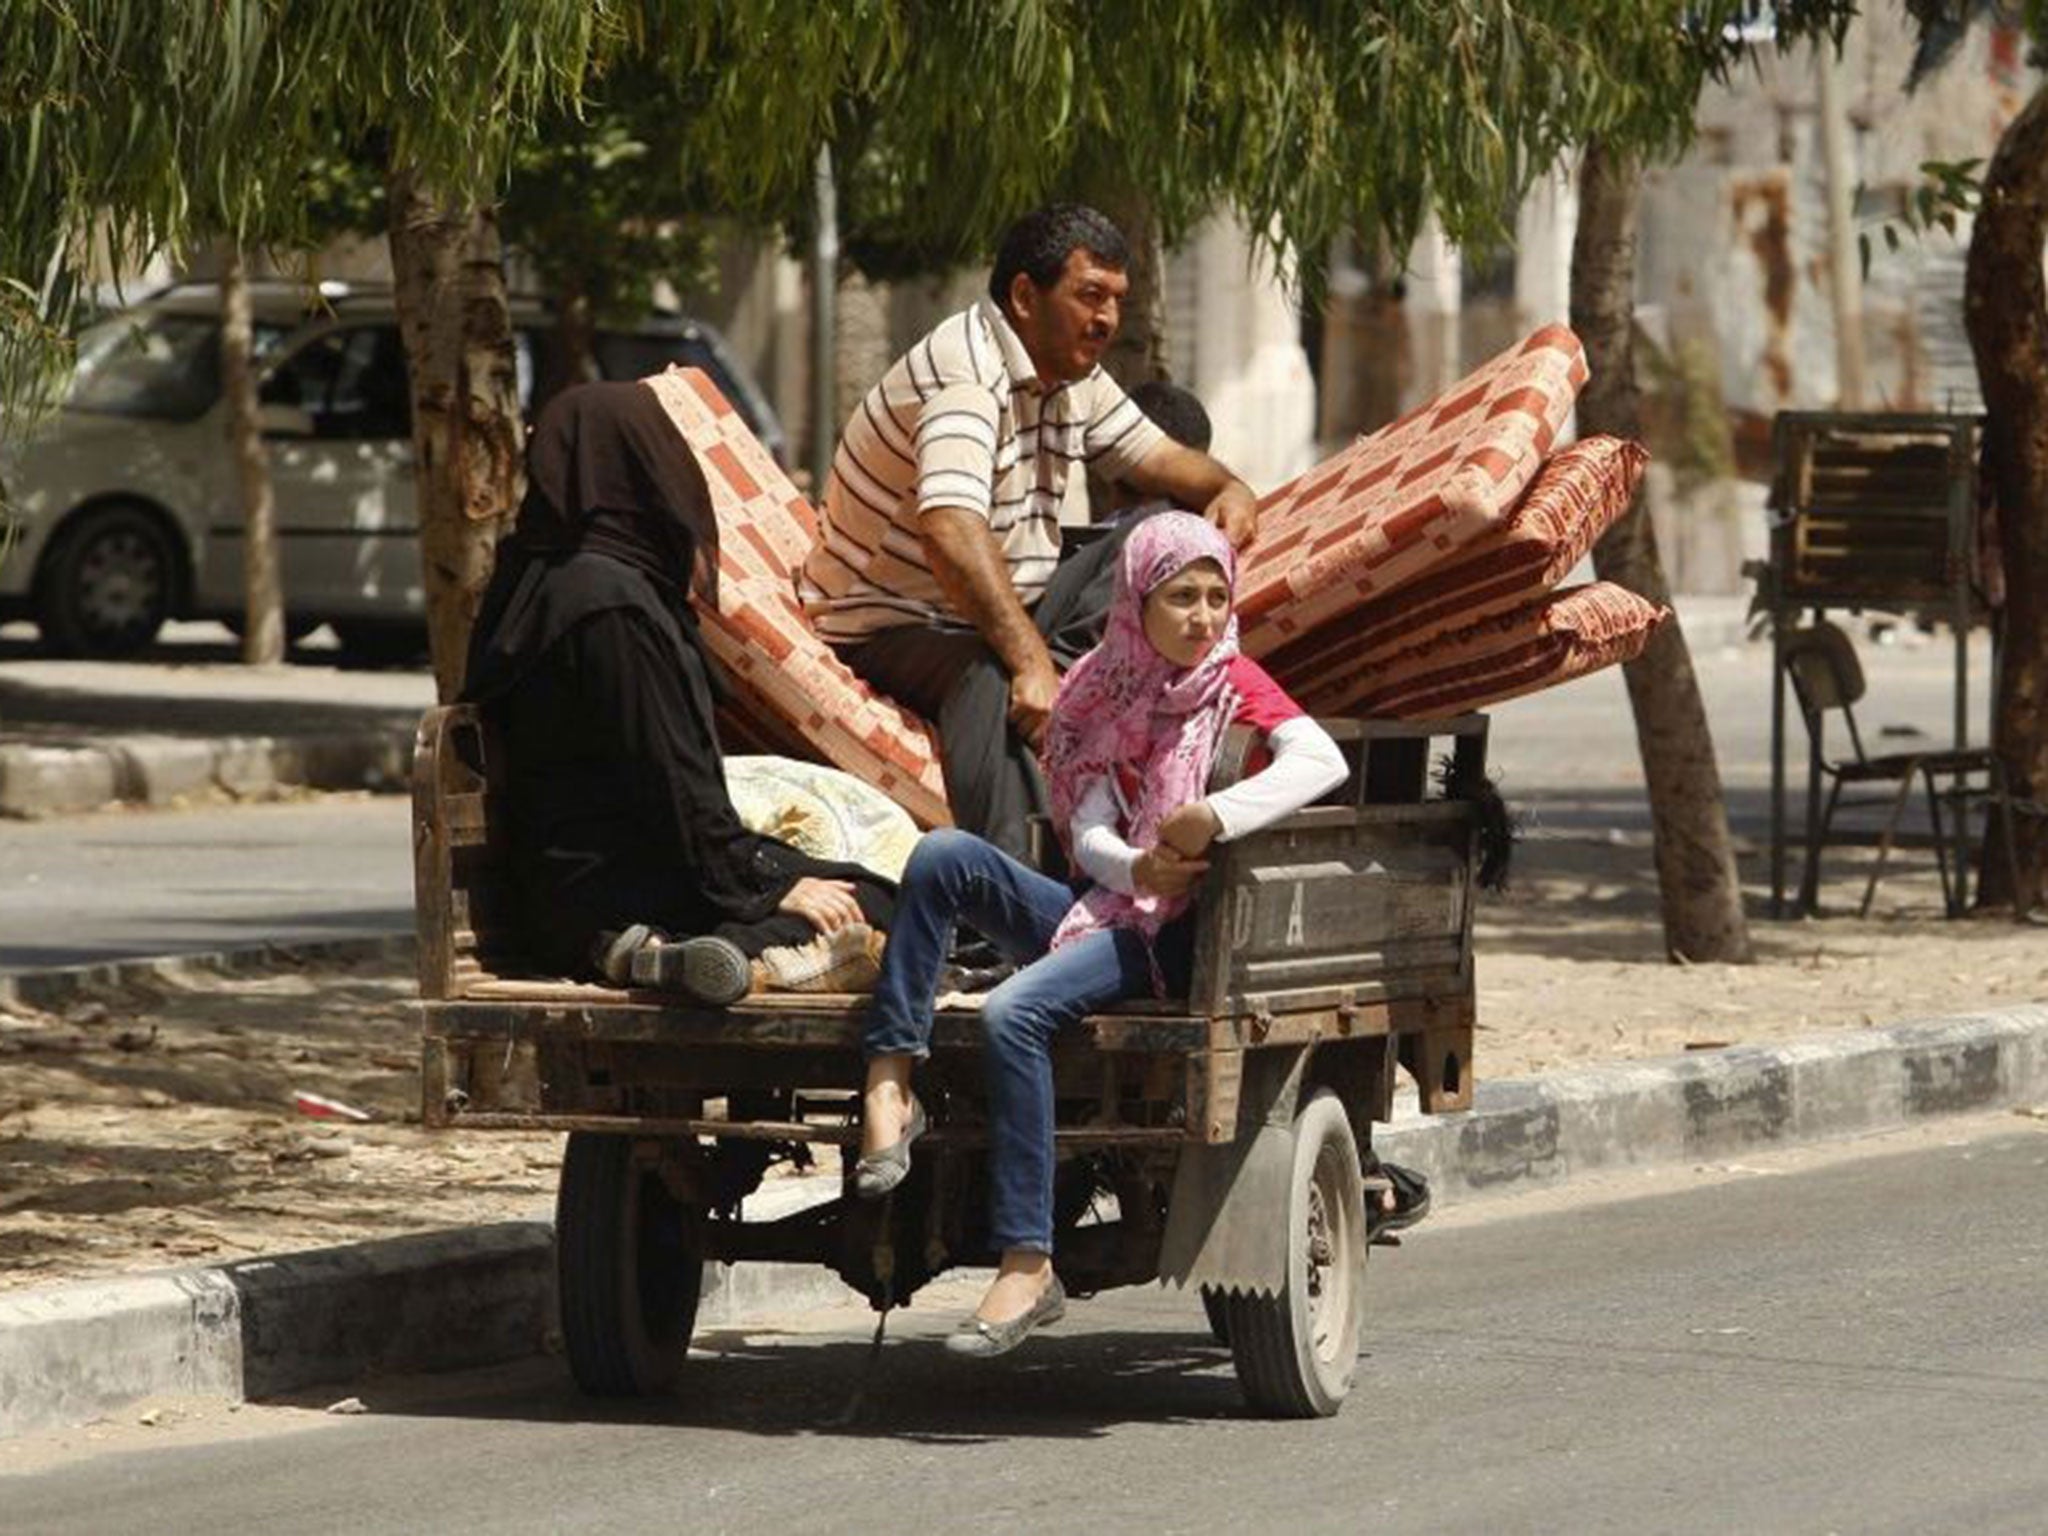 Palestinian refugees flee the conflict